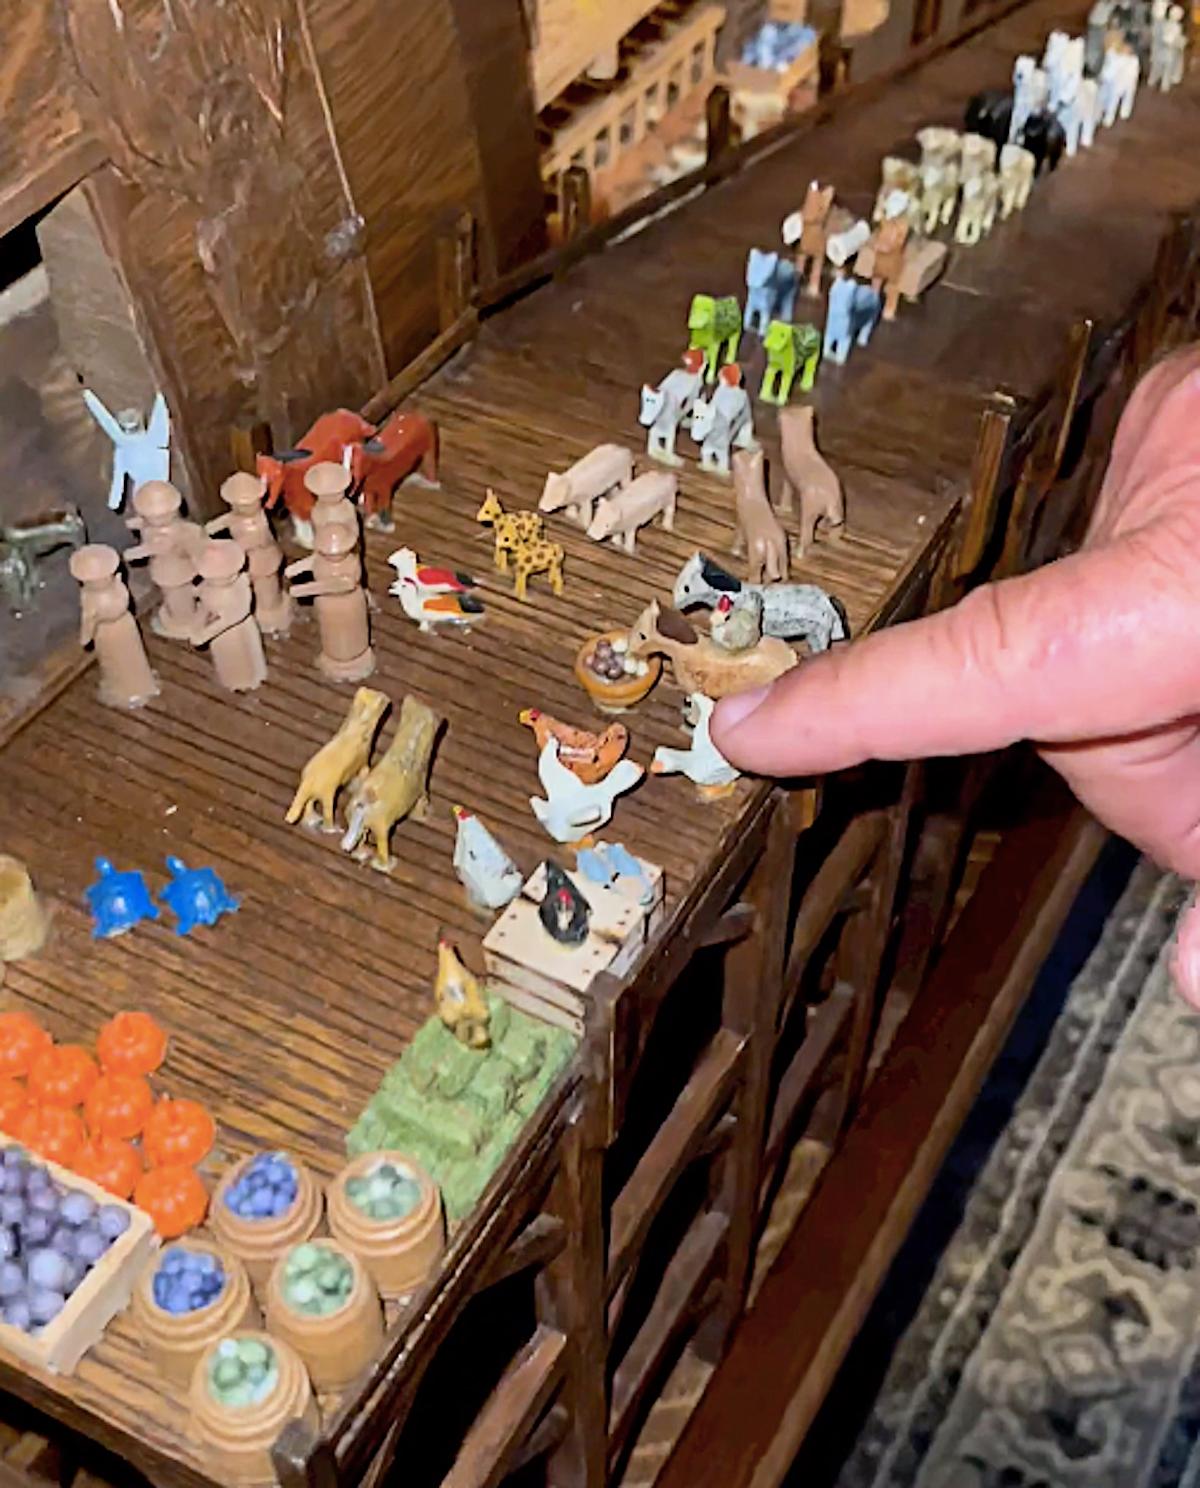 Replica animals made of wood are shown being filed into the Ark two by two. (Courtesy of <a href="https://www.instagram.com/hiskidscompany/">Megan Jenkins</a>)